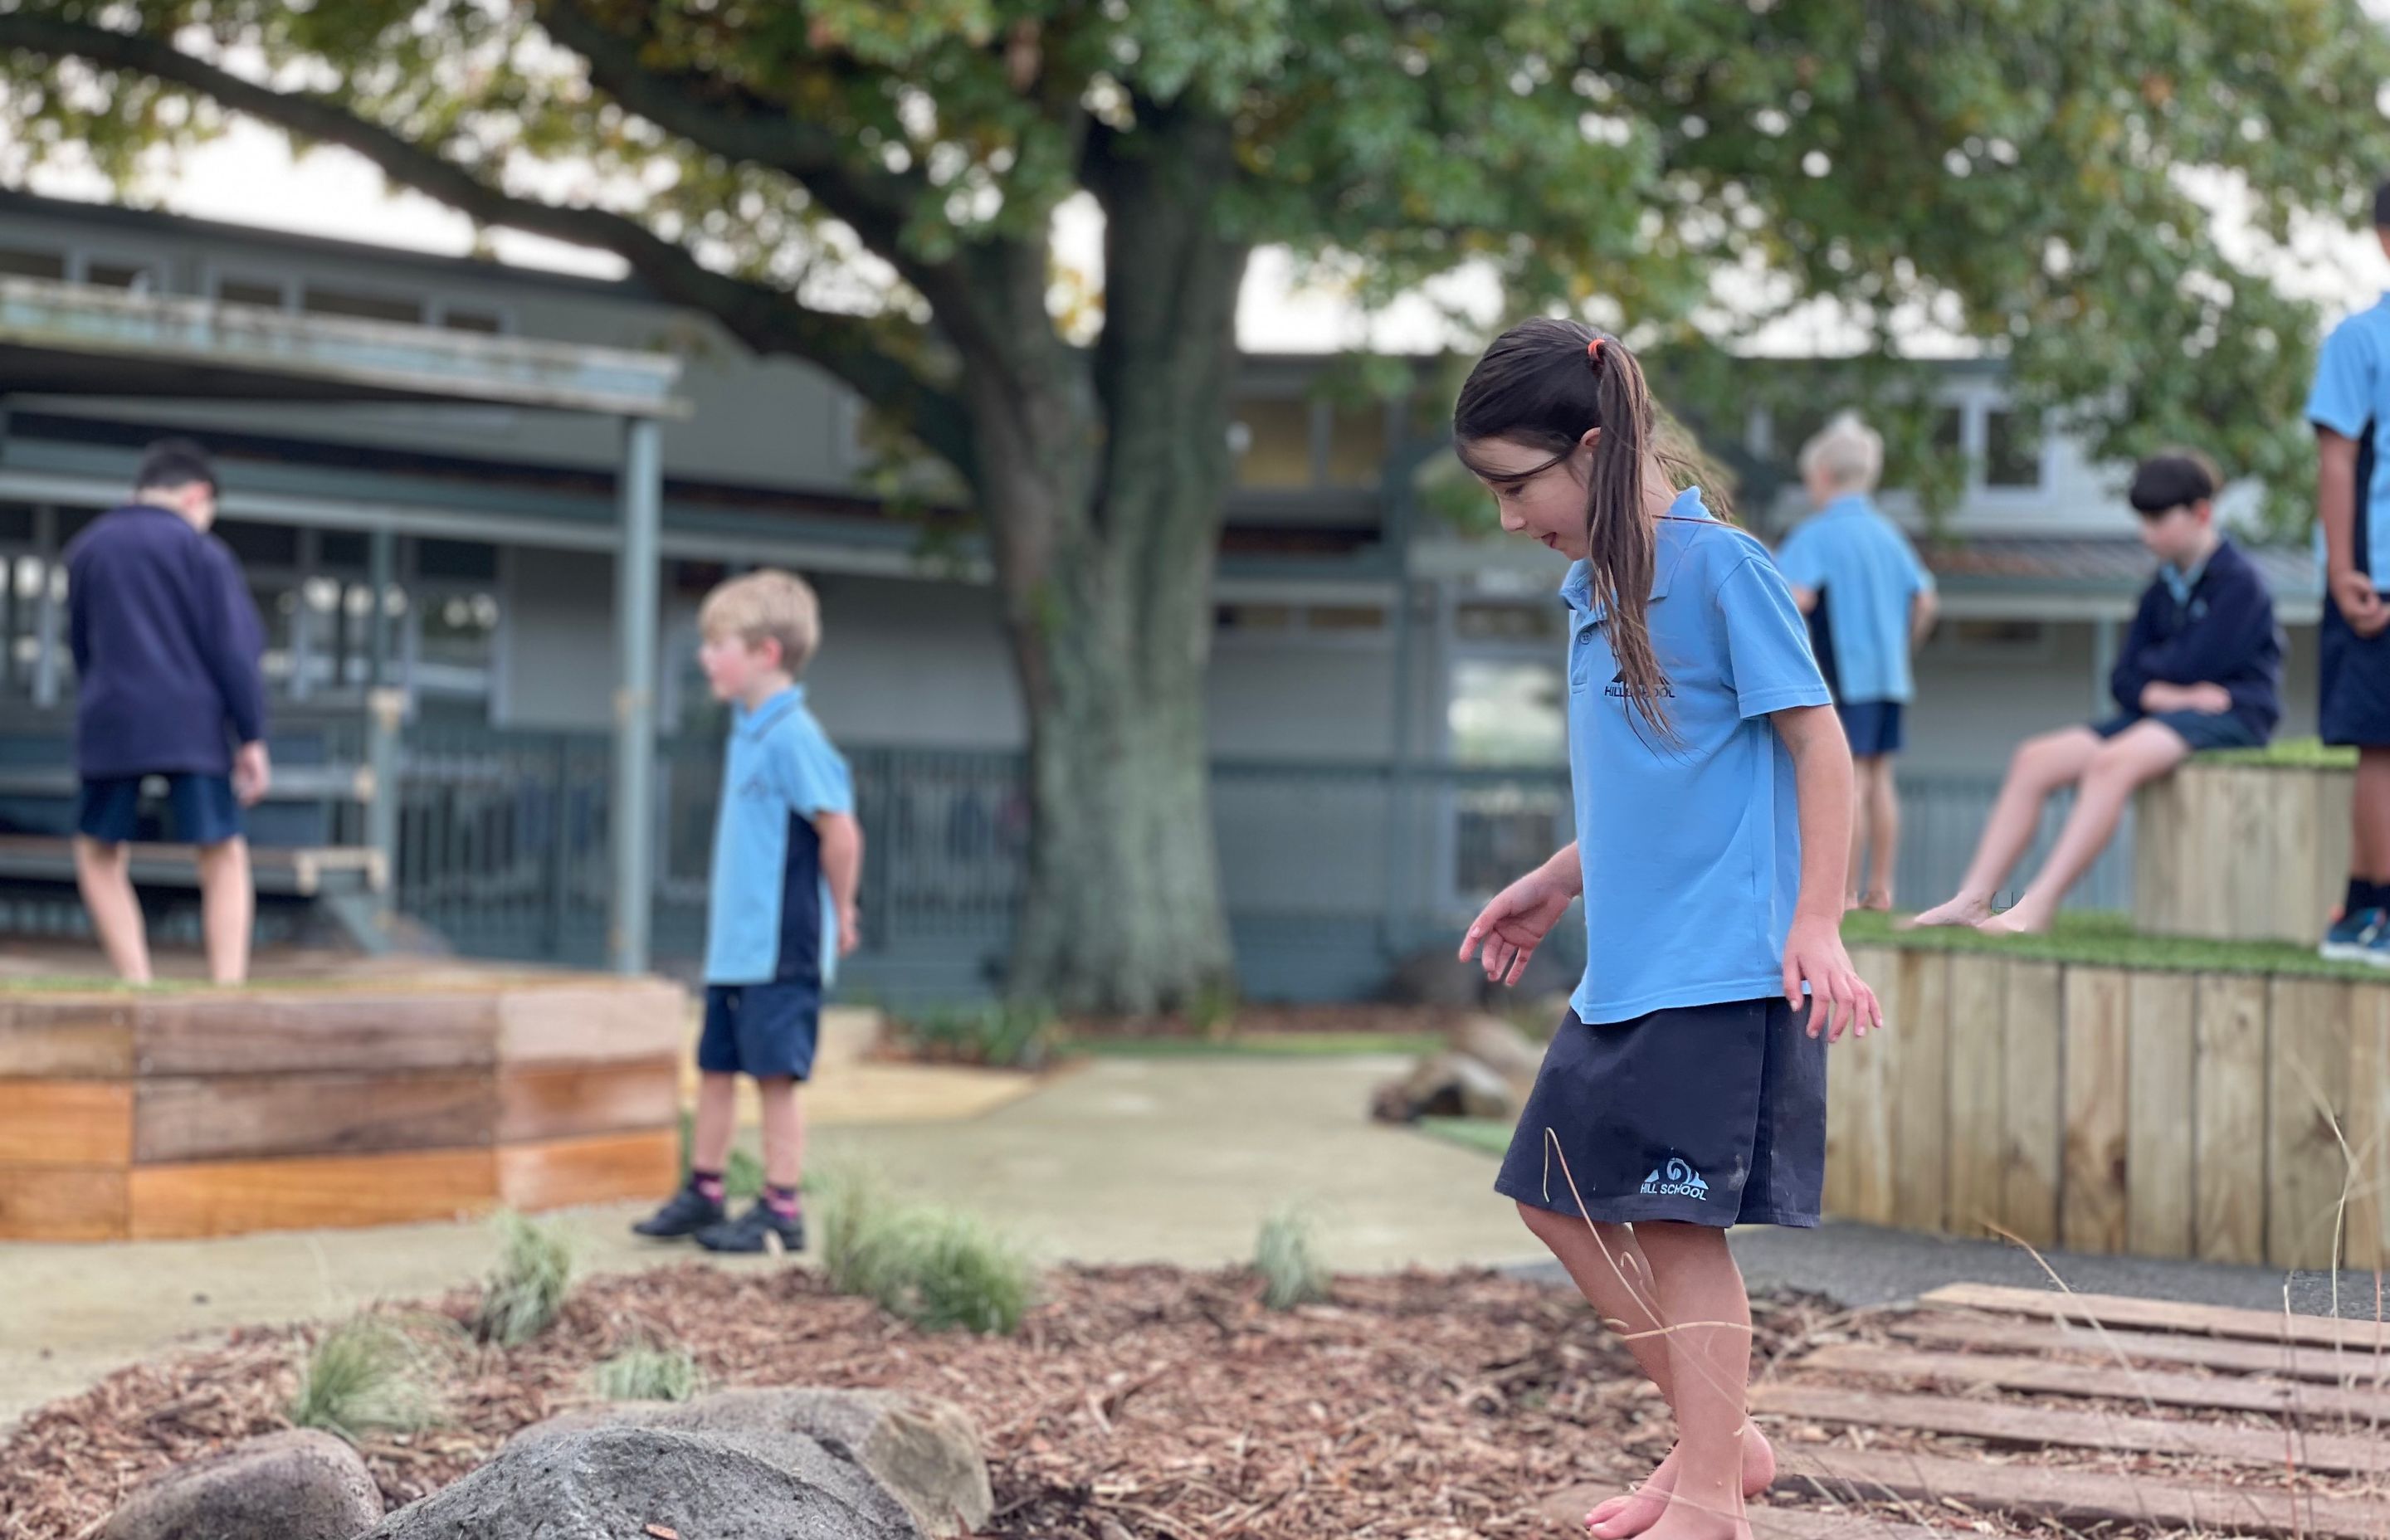 Pukekohe Hill School - Outdoor Learning Environment